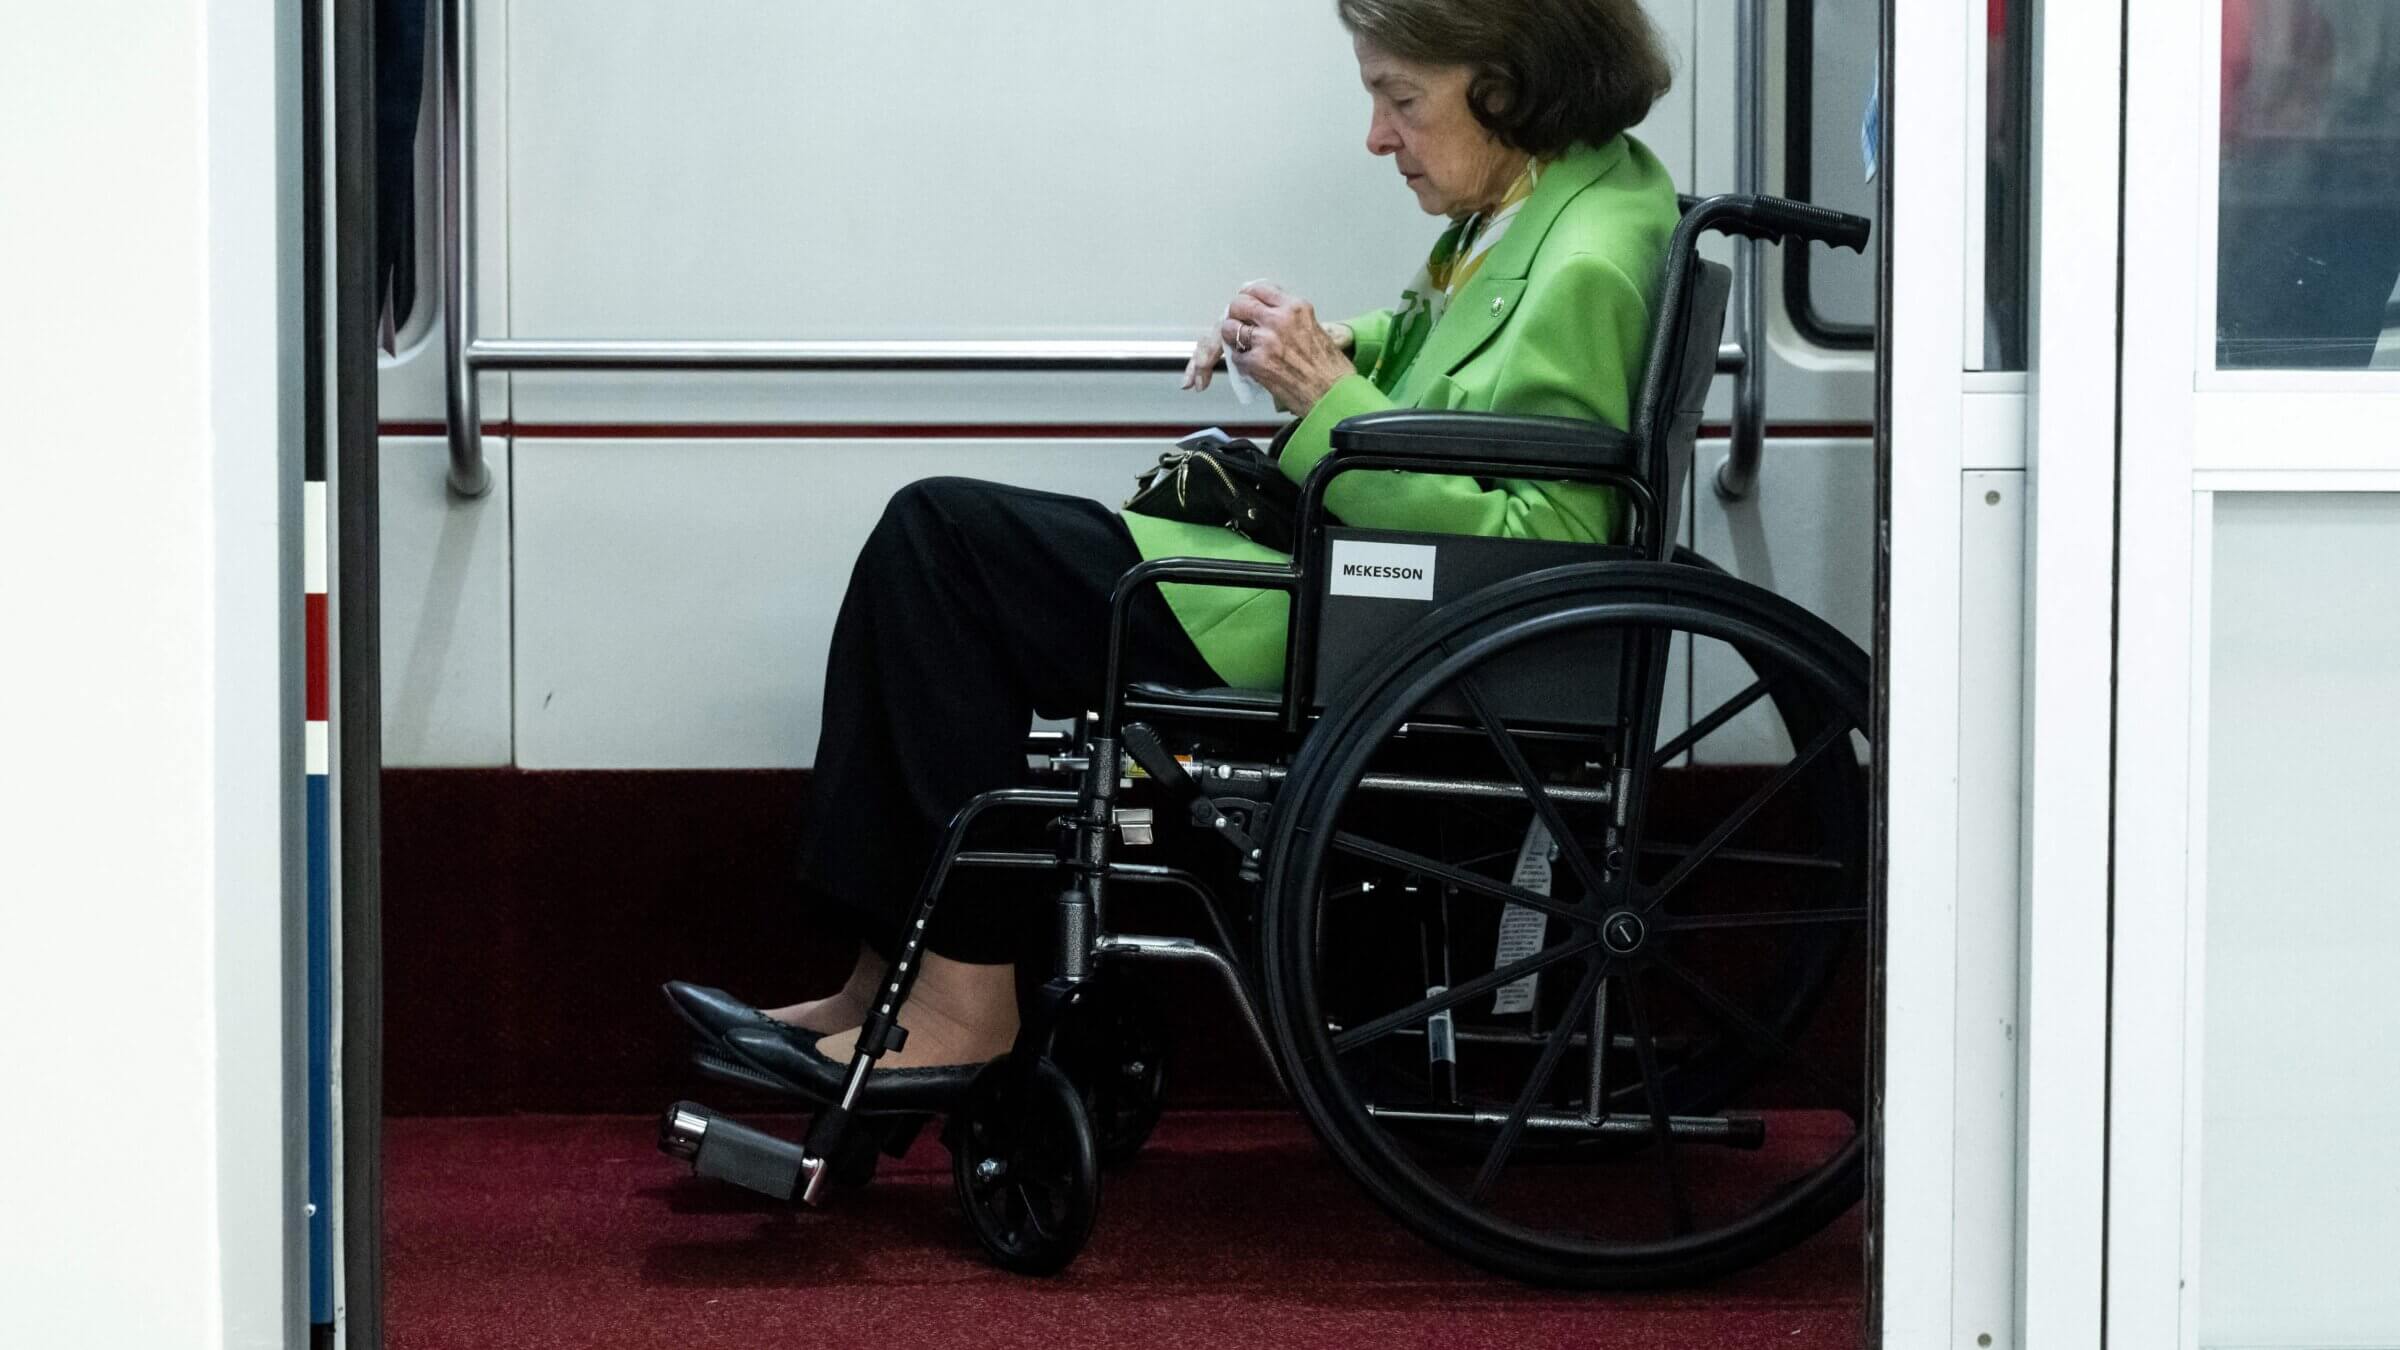 U.S. Sen. Dianne Feinstein sits in a wheelchair on the Senate Subway on Capitol Hill in Washington, DC, on July 27, 2023